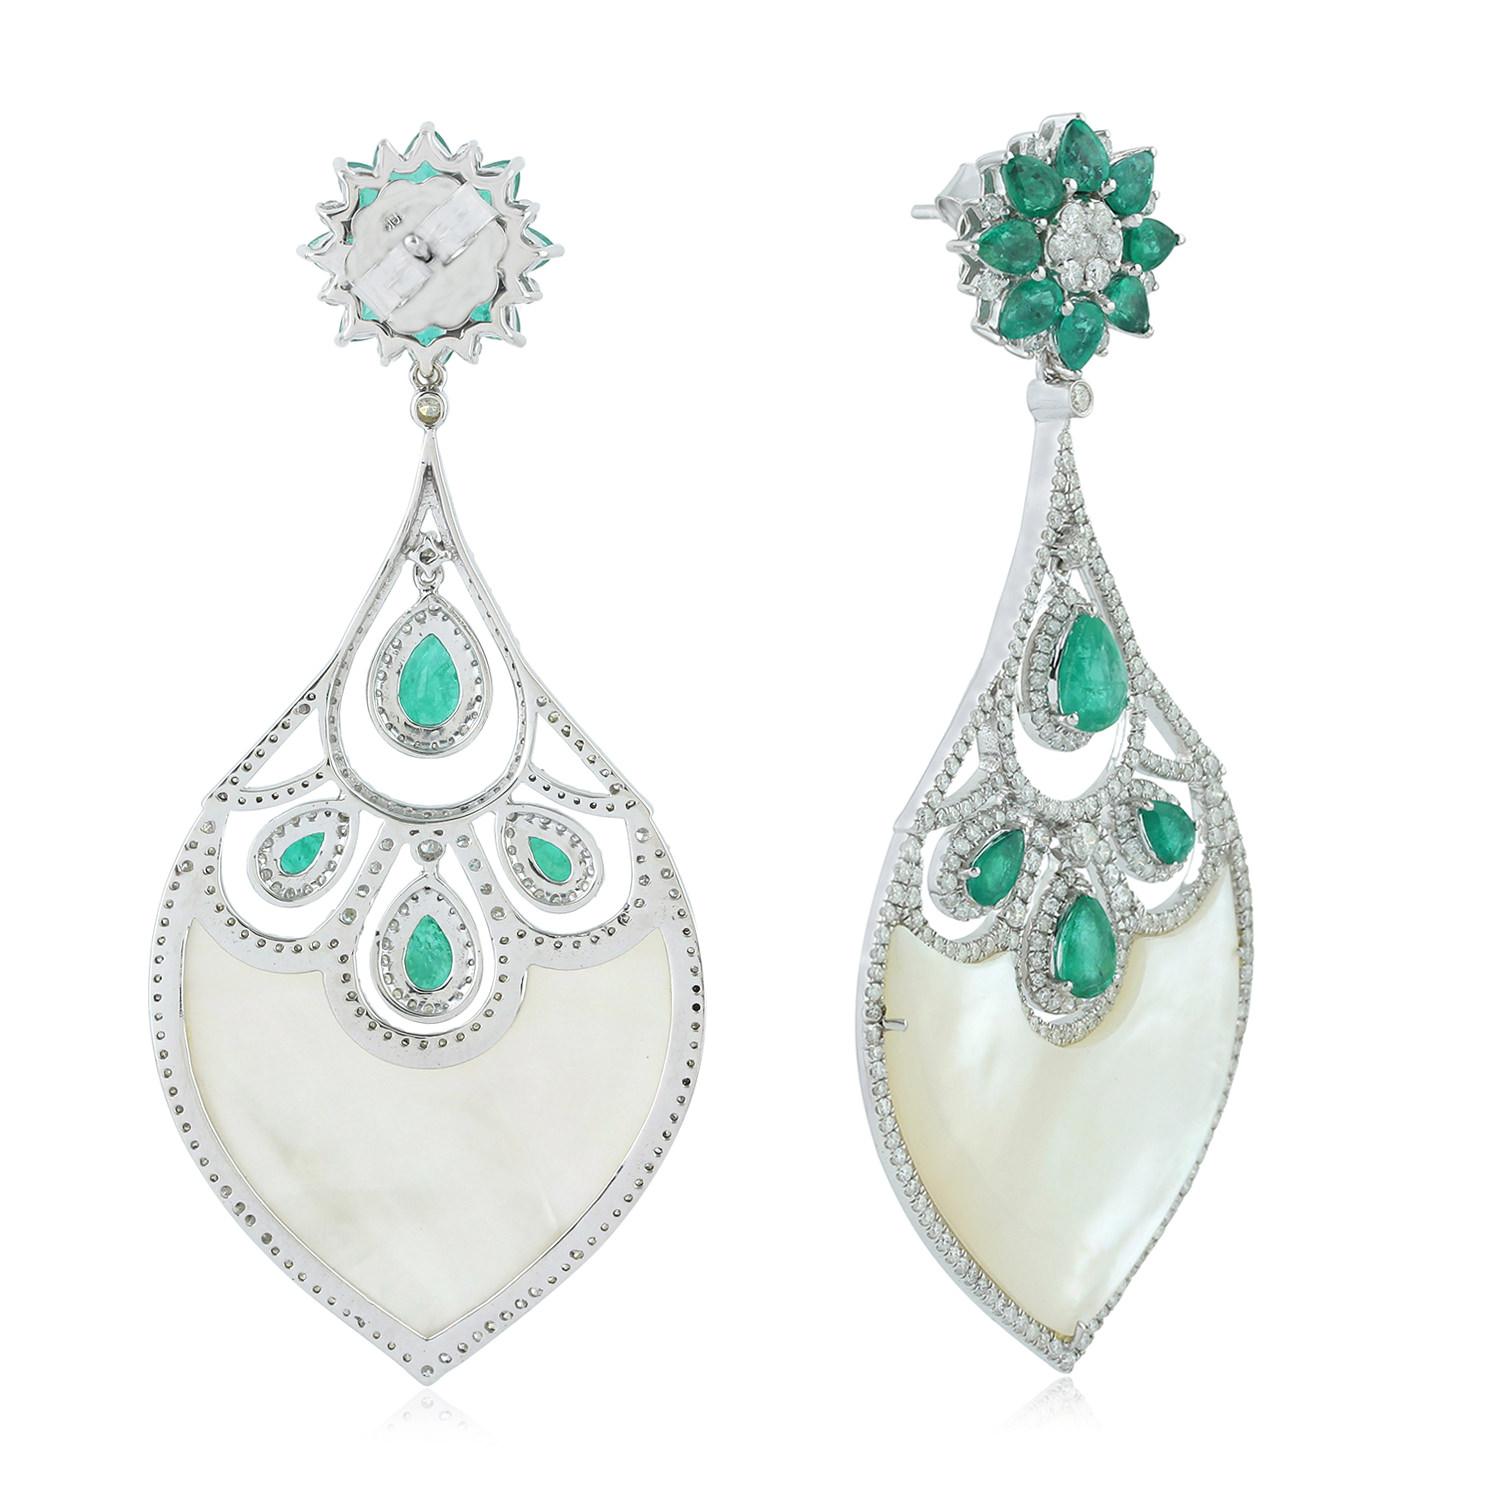 Contemporary 20.70ct Pearl Dangle Earrings With Emerald & Diamonds Made In 18k White Gold For Sale